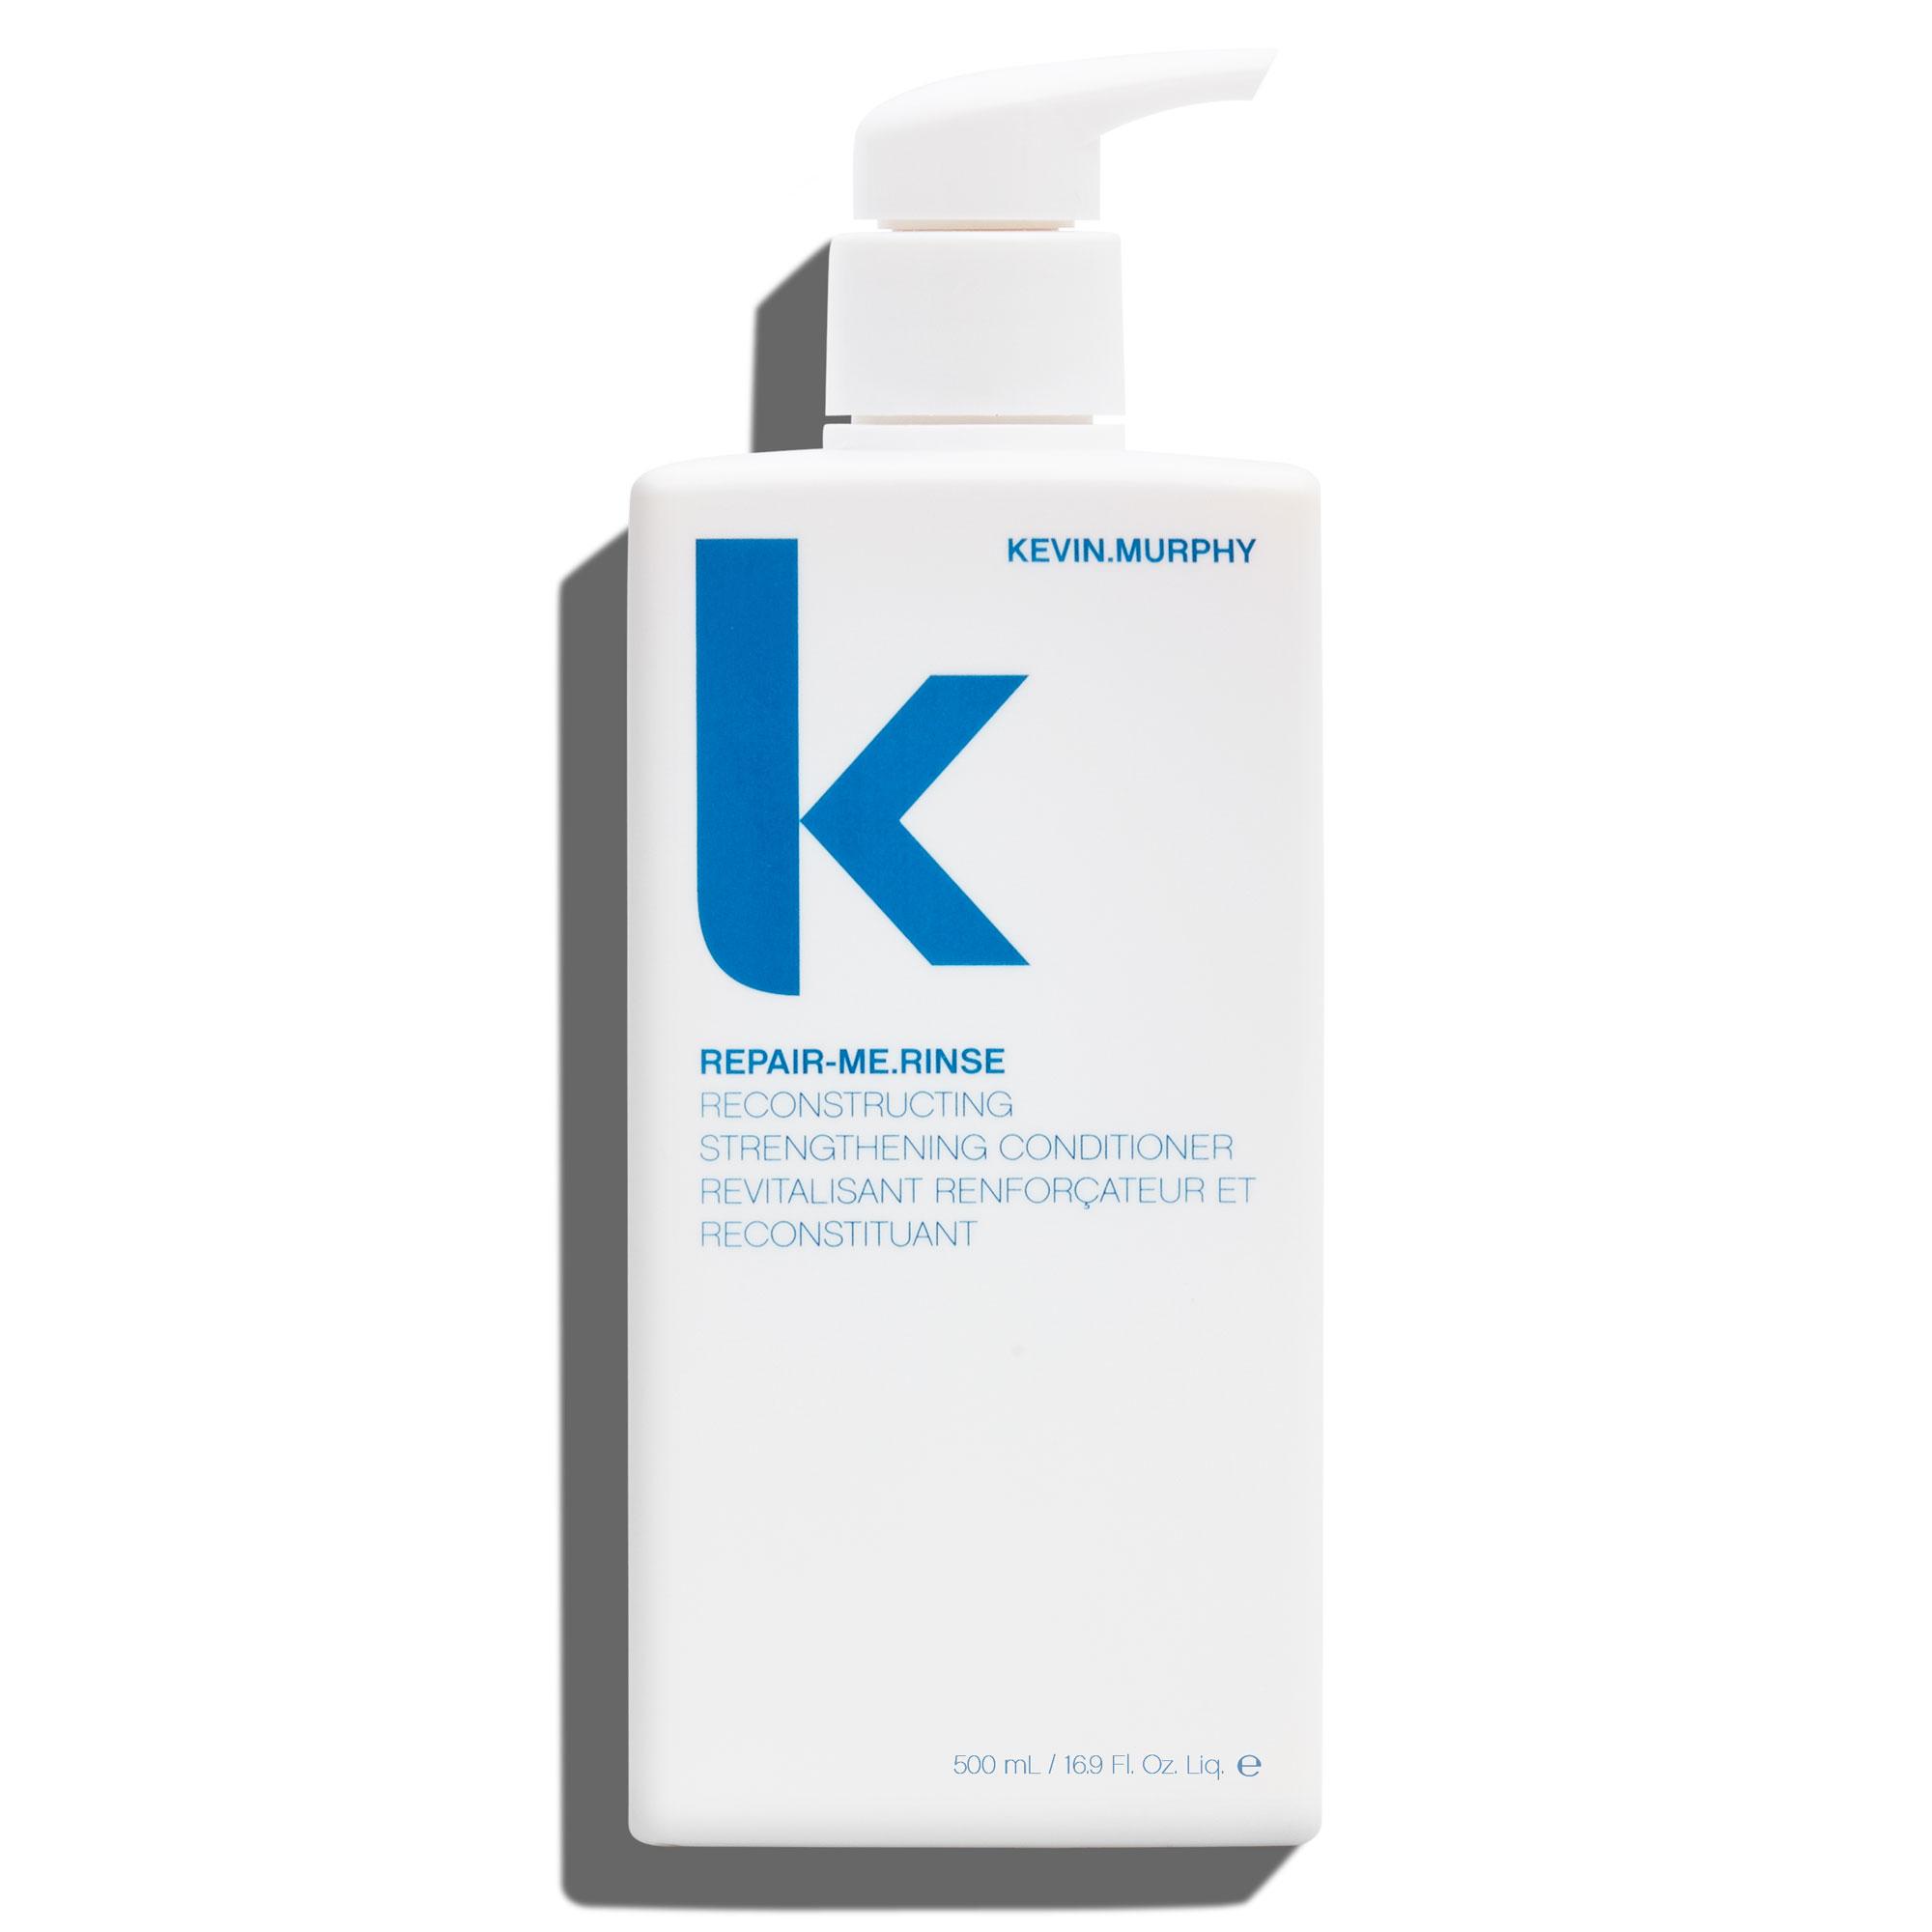 KEVIN.MURPHY REPAIR.ME RINSE (Limited Edition)